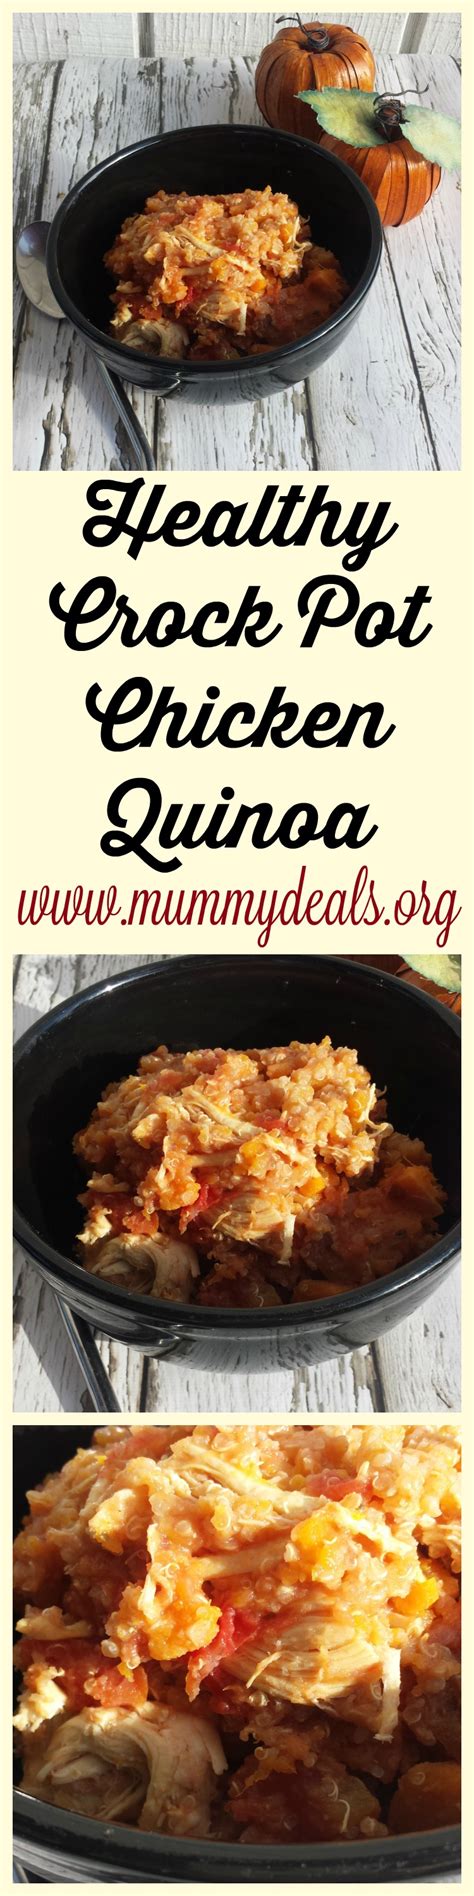 The long cooking times allow ingredients to really set the crock pot on low before bed to have a hearty breakfast waiting for you when the alarm goes off. Healthy Crock Pot Chicken Quinoa